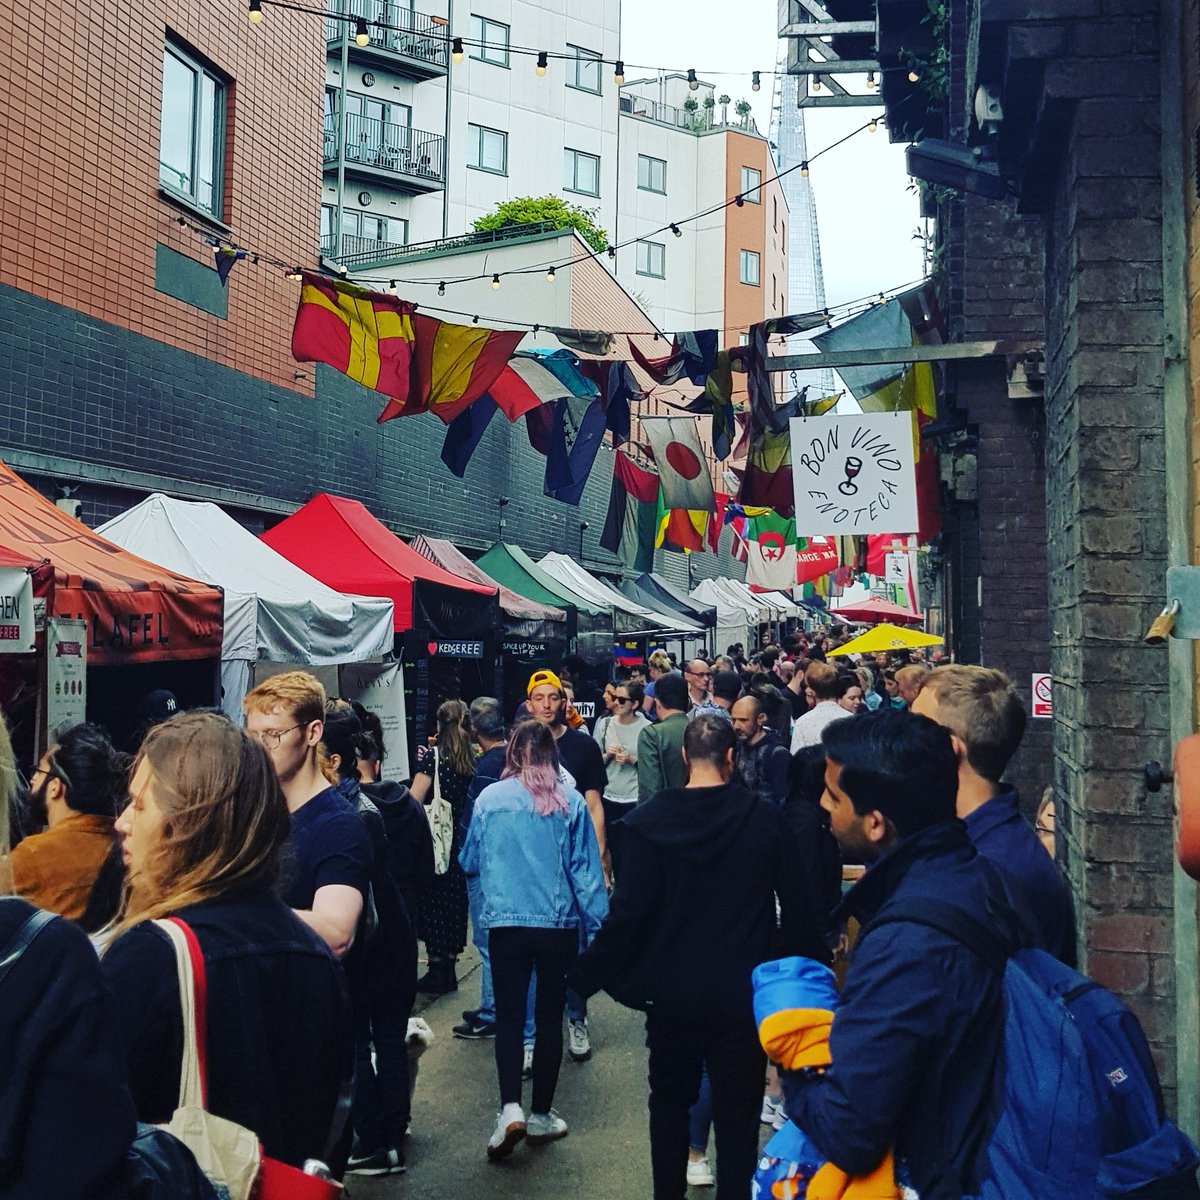 #maltbystreet market: the hidden gem of #london. 

A bustling bazaar of great street food, craft beer and baked goodie.

Must visit destination for locals and tourists alike.

#TheLondonGuide

#Markets #streetfood #foodie #travel #tourism #travelgram #craftbeer #VisitGreatBritain